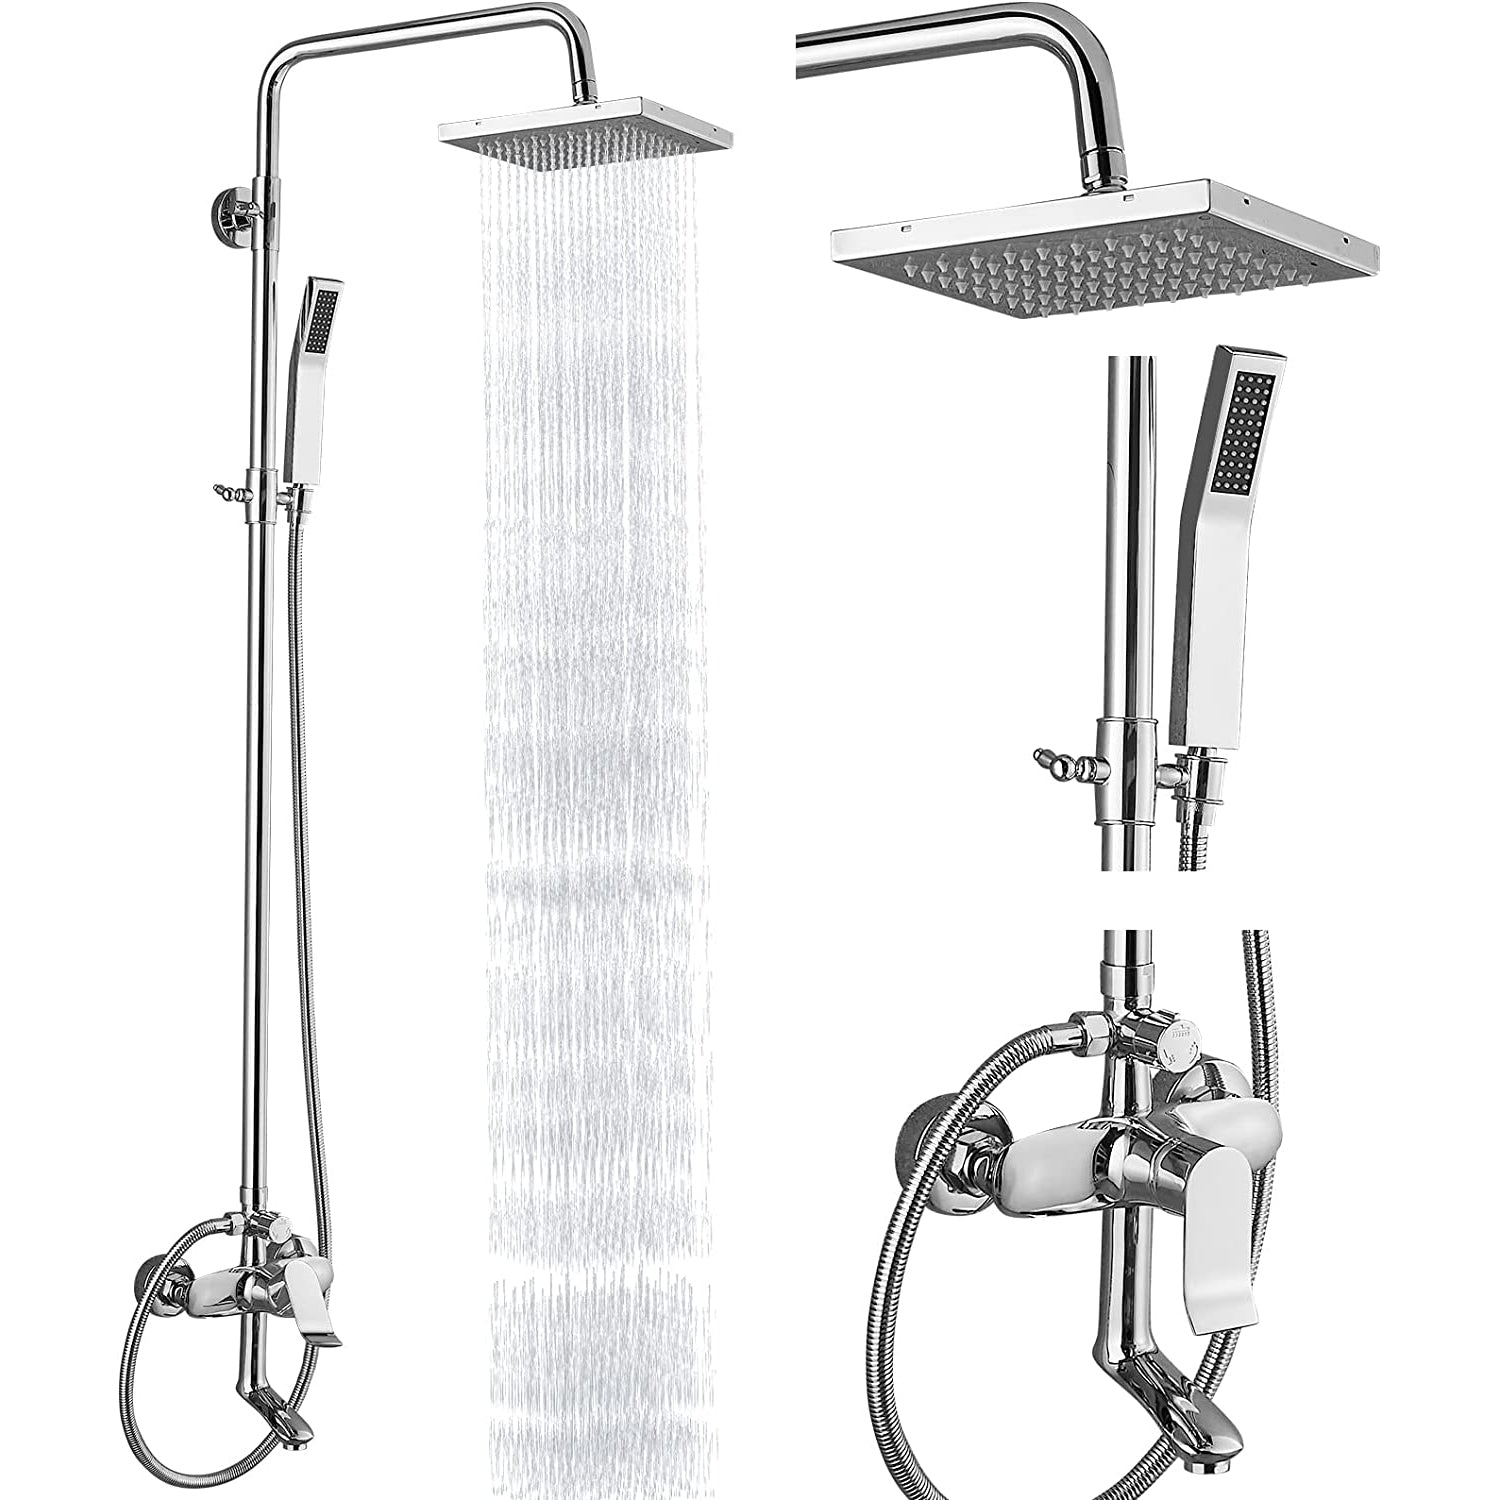 3 Functional Bathroom Shower Set 8 Inch Square Rainfall Shower Head with Wall Mounted